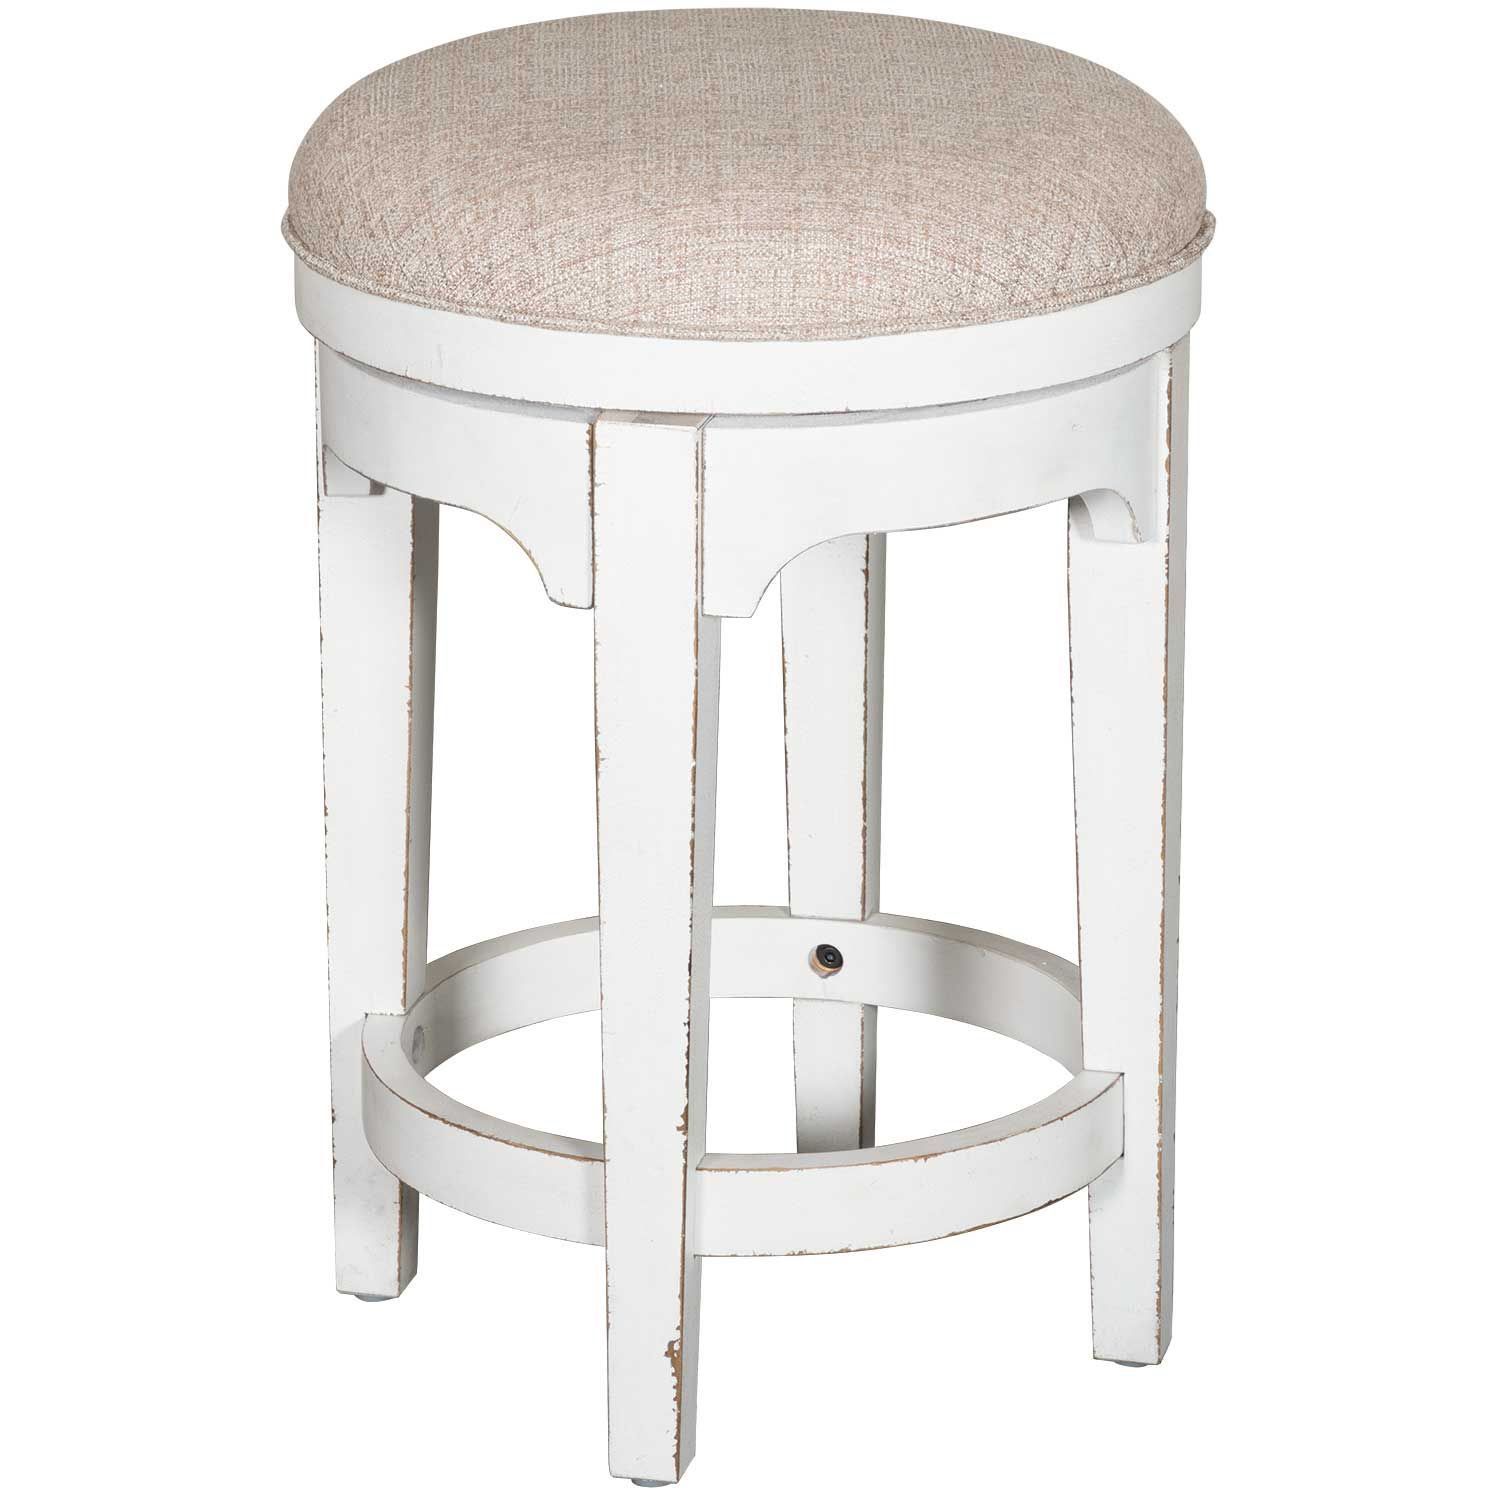 Magnolia Manor Console Swivel Barstool | 244 Ot9003 | Liberty With Regard To Manor Grey Swivel Chairs (View 16 of 20)